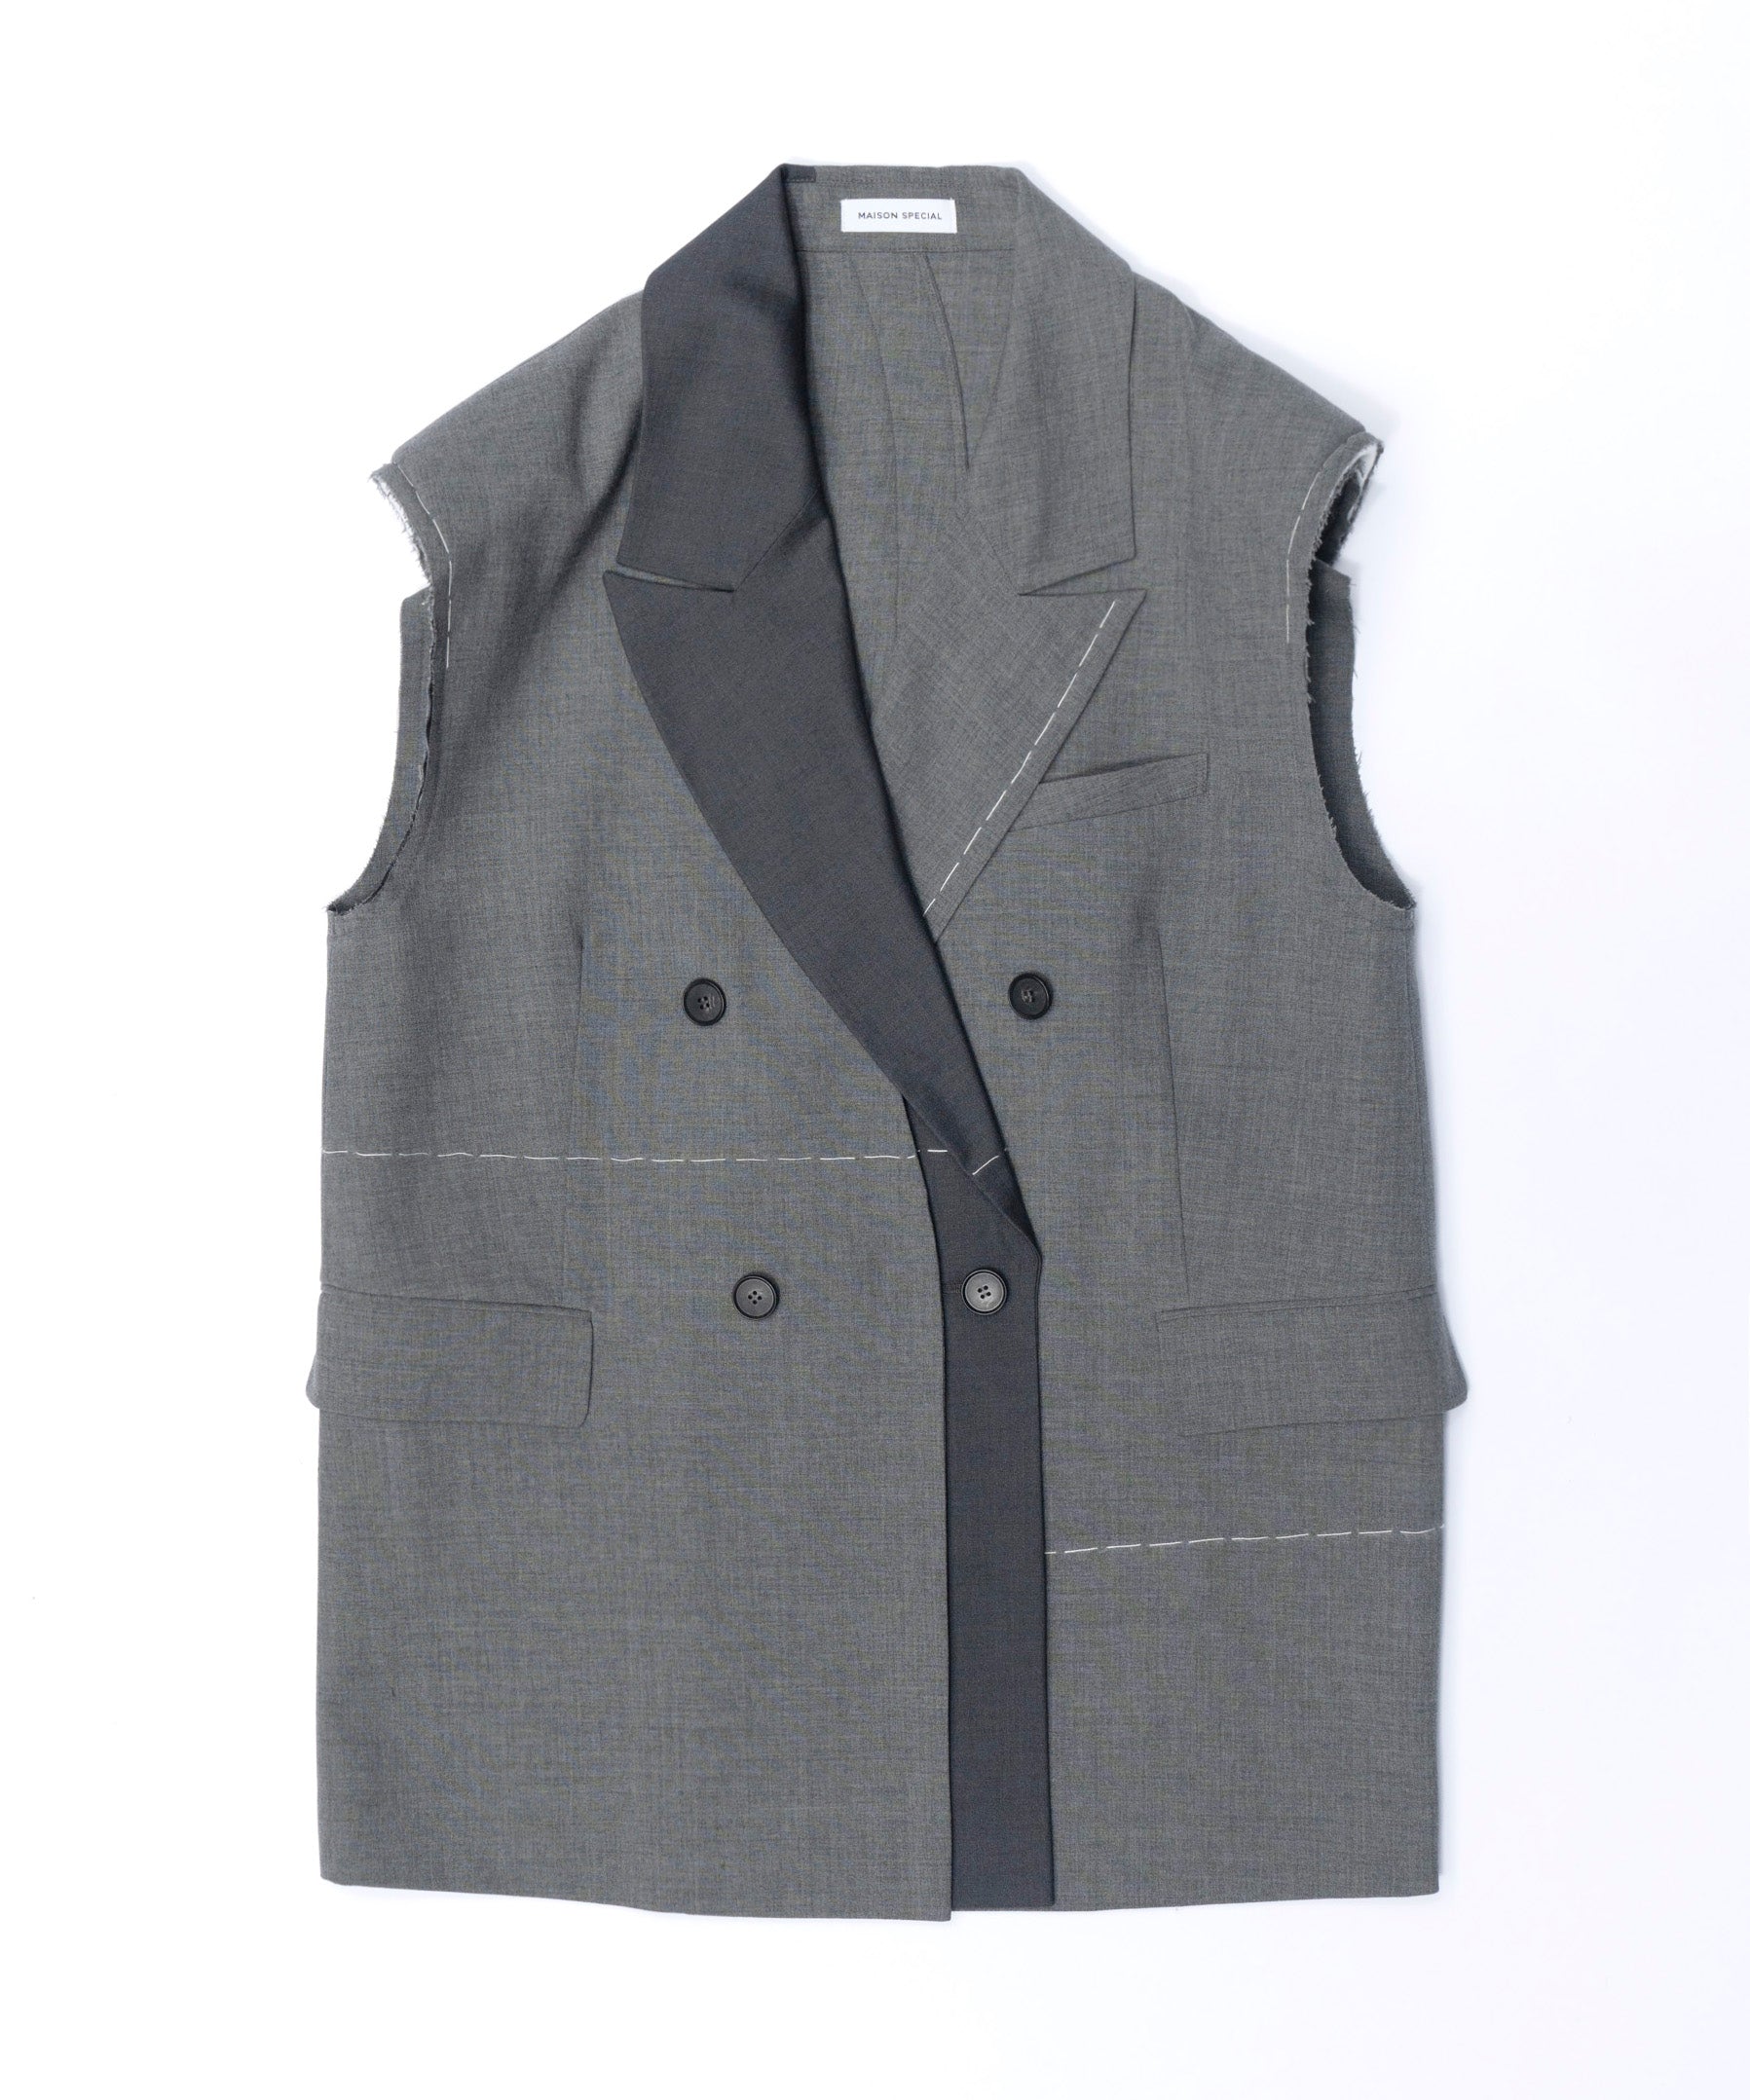 【24SPRING PRE-ORDER】Double Color Hand Stitched Gilet